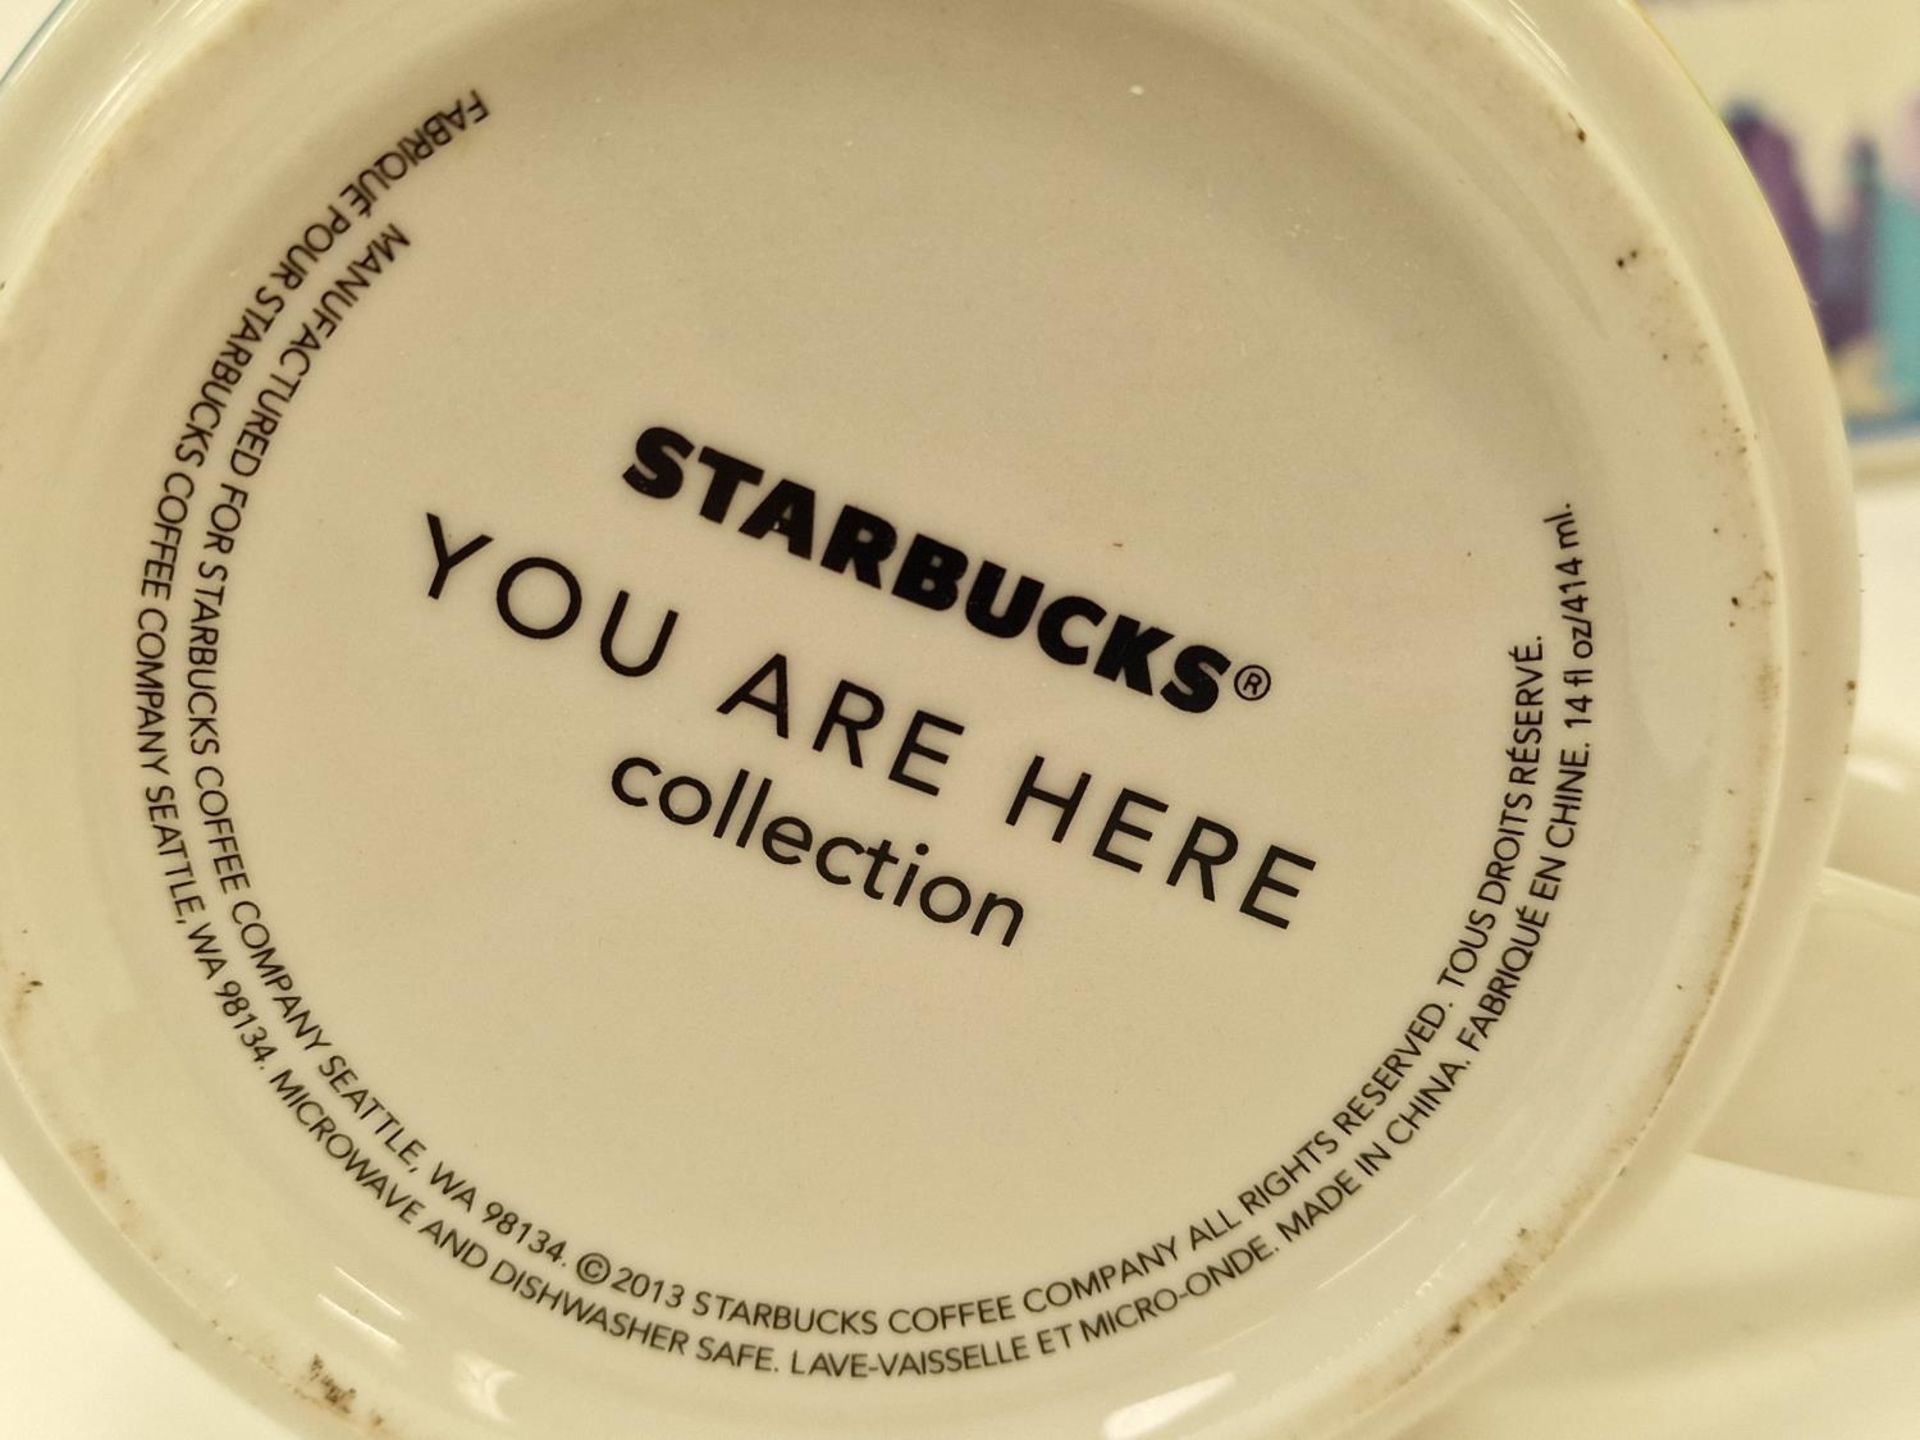 Starbucks "You Are Here" collection of U.S. and other porcelain mugs to include Amsterdam, Madrid, - Image 4 of 4